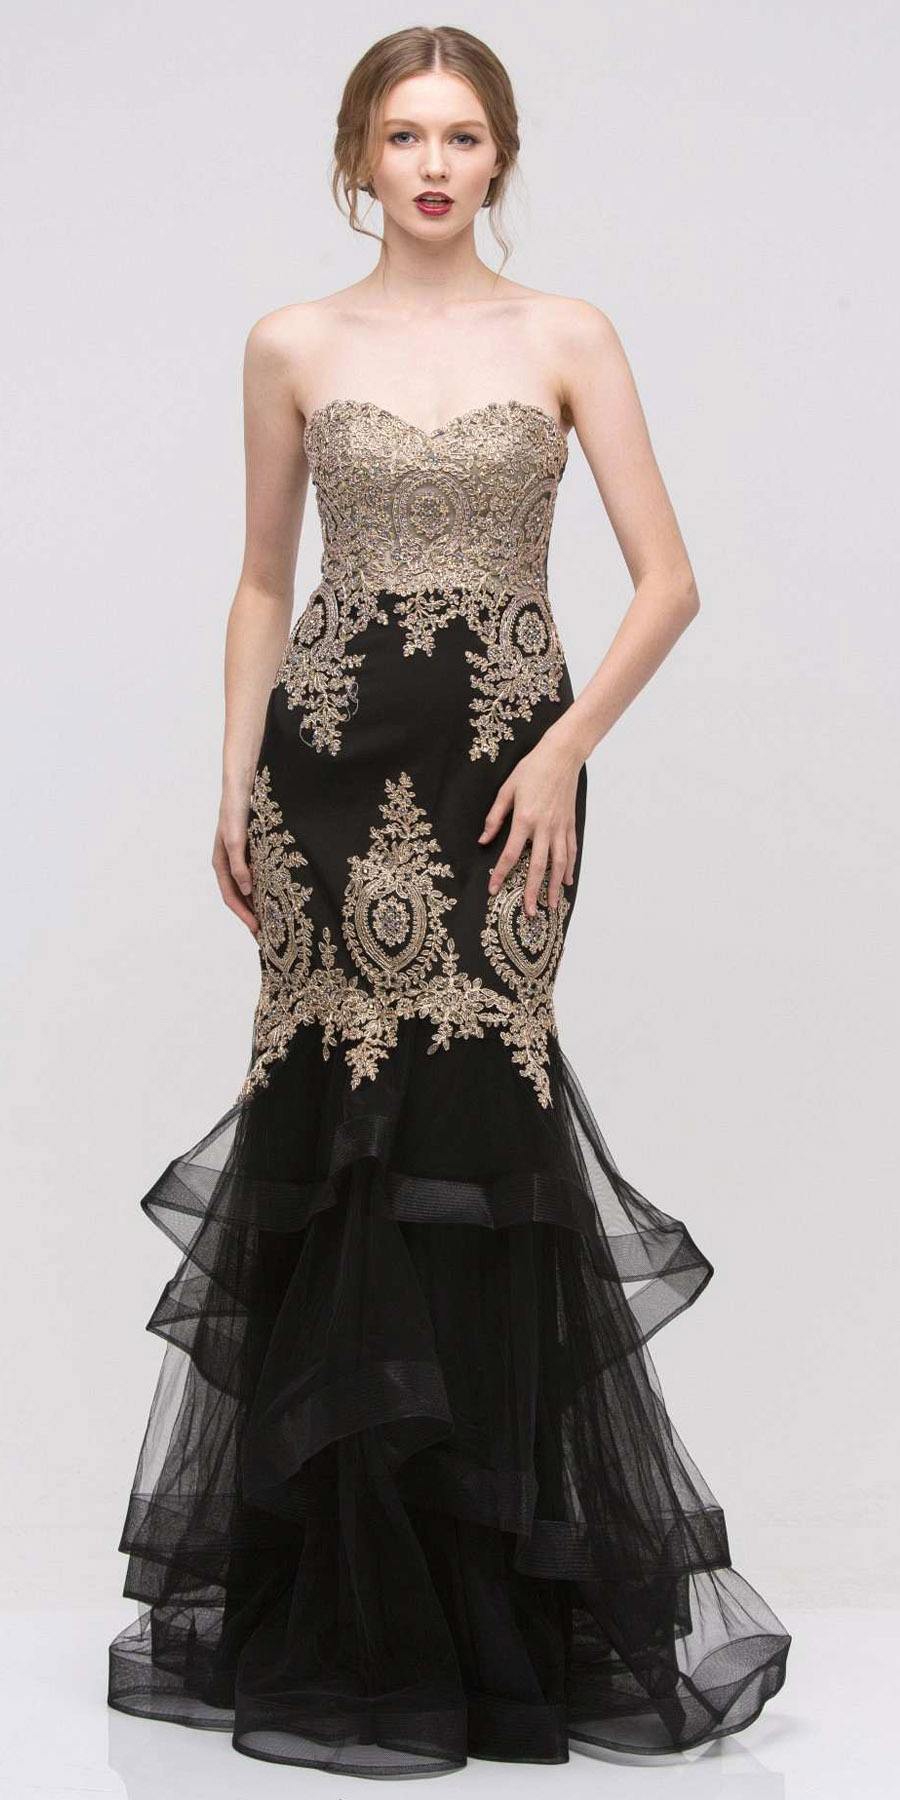 Eureka Fashion 6009 Strapless Embroidered Prom Gown Layered Skirt Sweetheart Neck Black